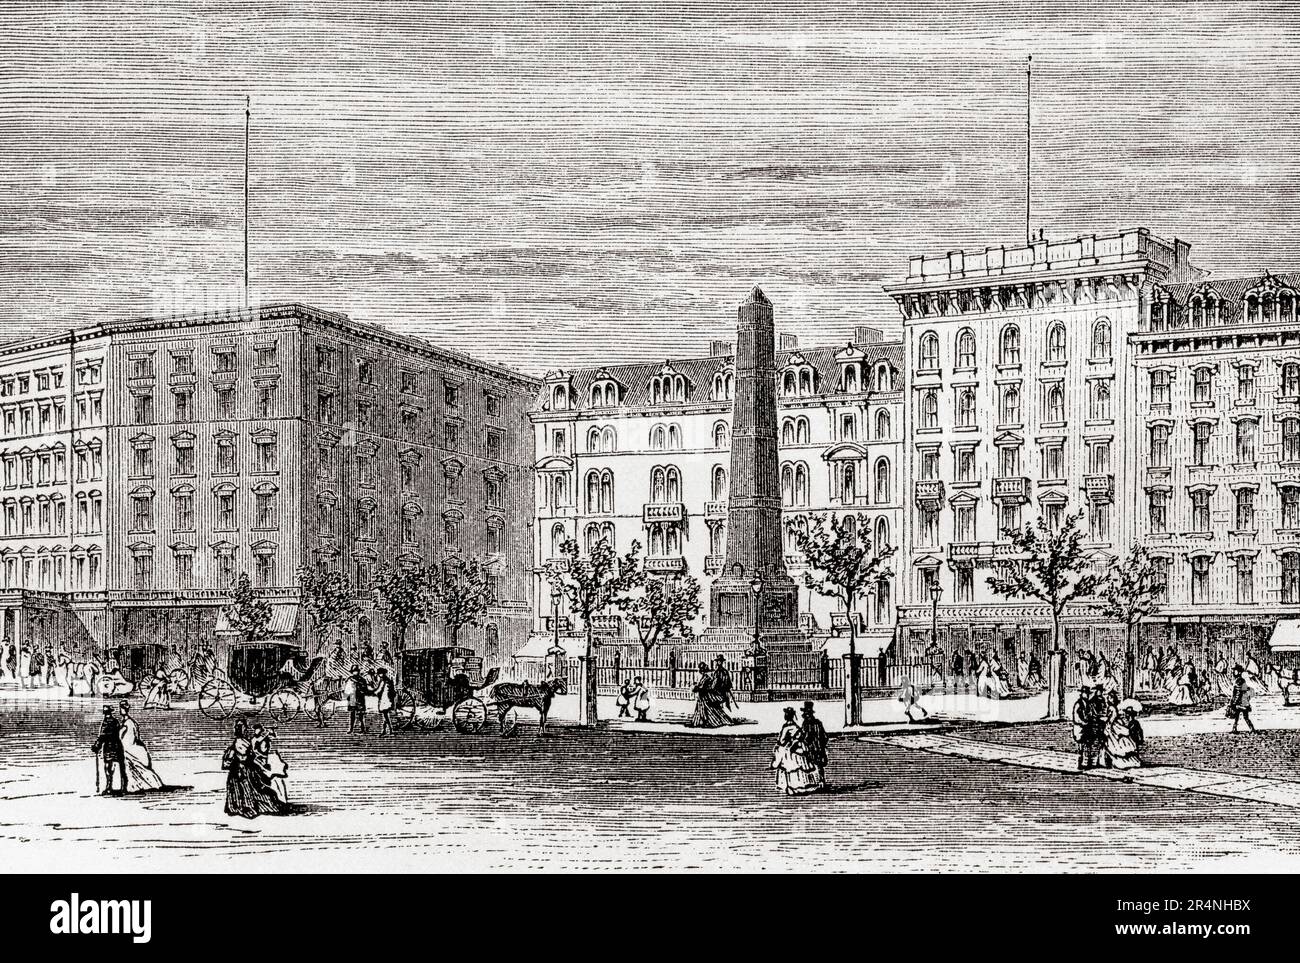 The Fifth Avenue Hotel, Madison Square, Manhattan, New York City.  Built in1859 the hotel was demolished in 1908.  From America Revisited: From The Bay of New York to The Gulf of Mexico, published 1886. Stock Photo